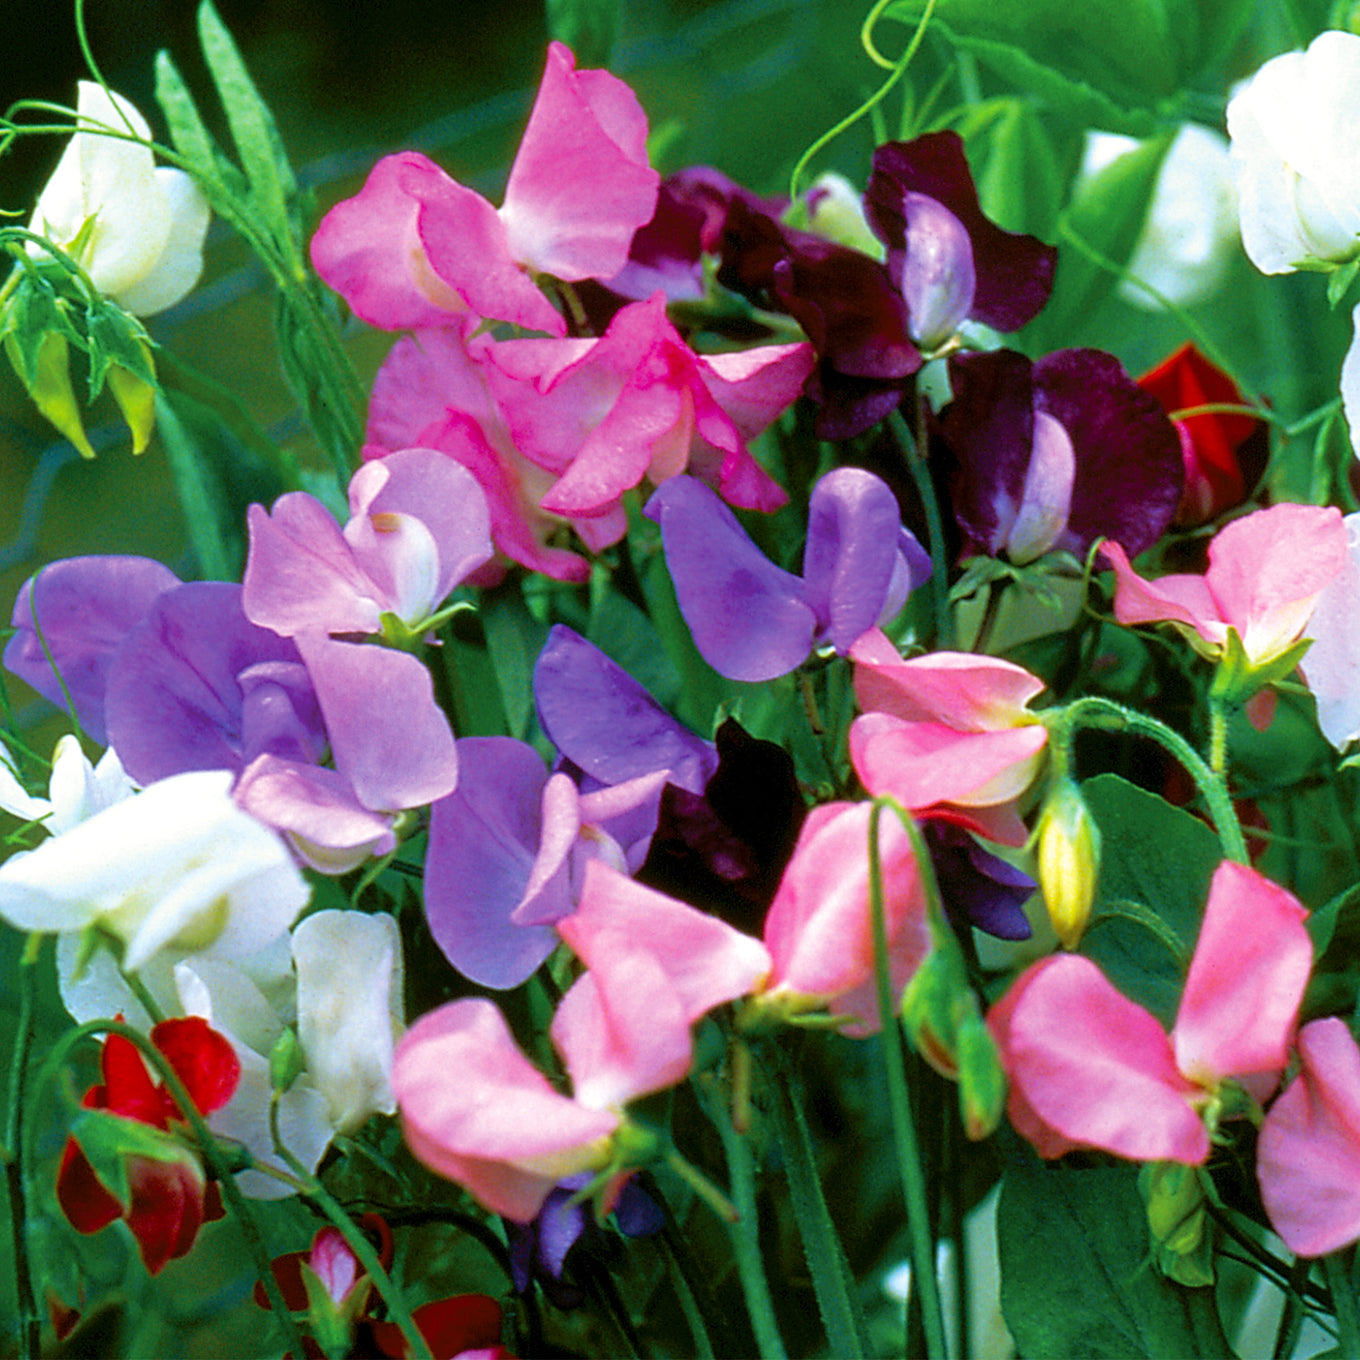 Early Flowering Mixed Colors Sweet Pea Flower seeds fully grown and matured, blooming their beautiful shades of whites, blues, pinks and reds.